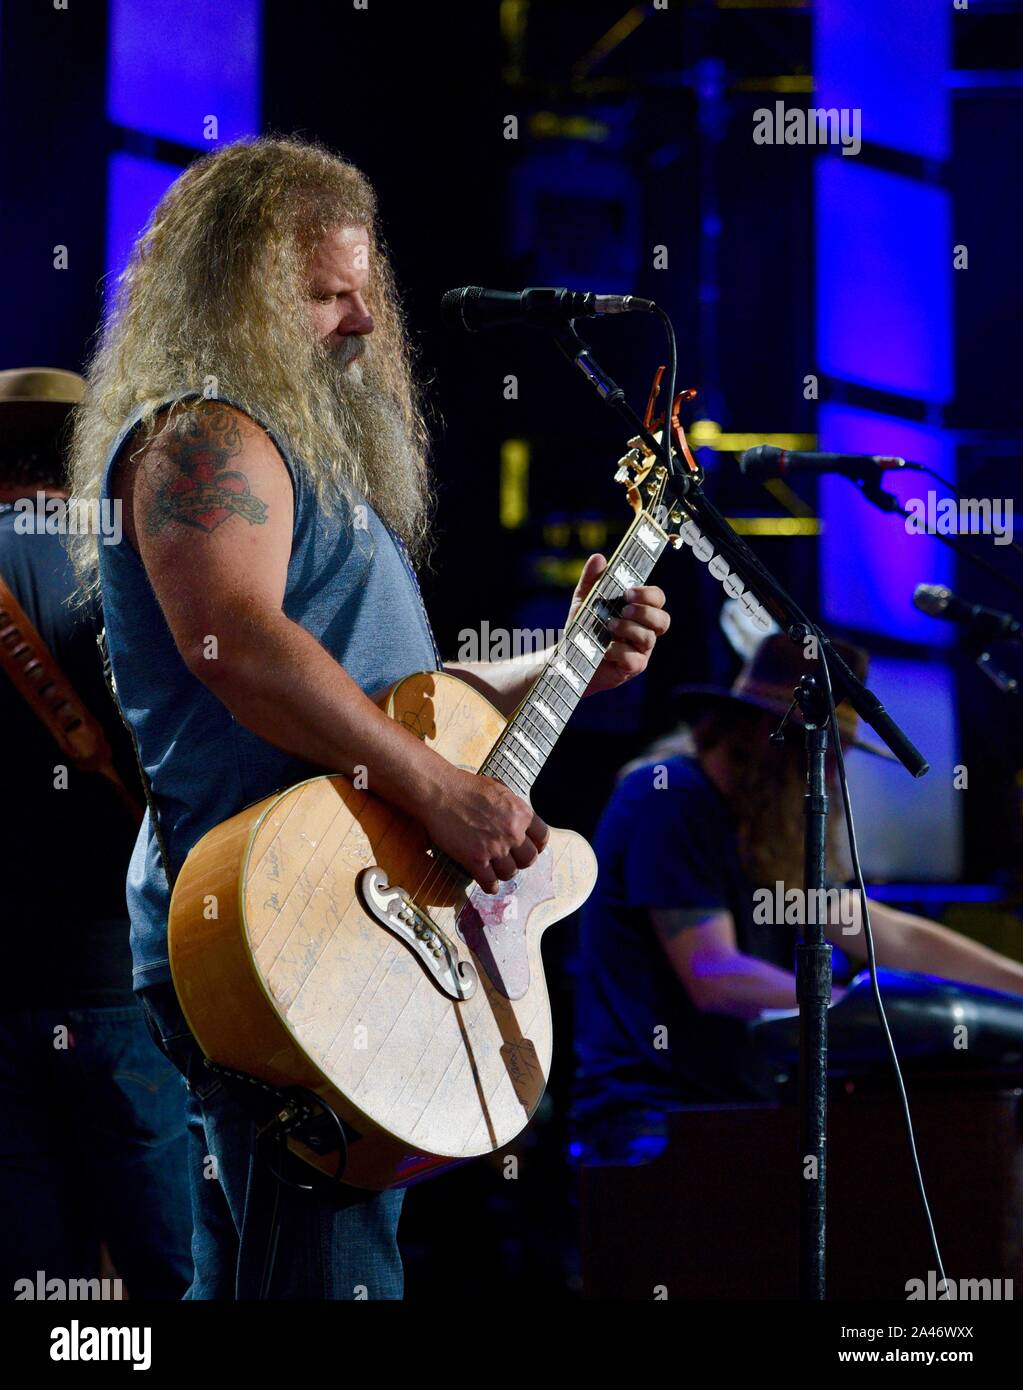 Jamey Johnson, a famous and talented American country singer and songwriter from Nashville, TN, performing at Farm Aid, in East Troy, Wisconsin, USA Stock Photo